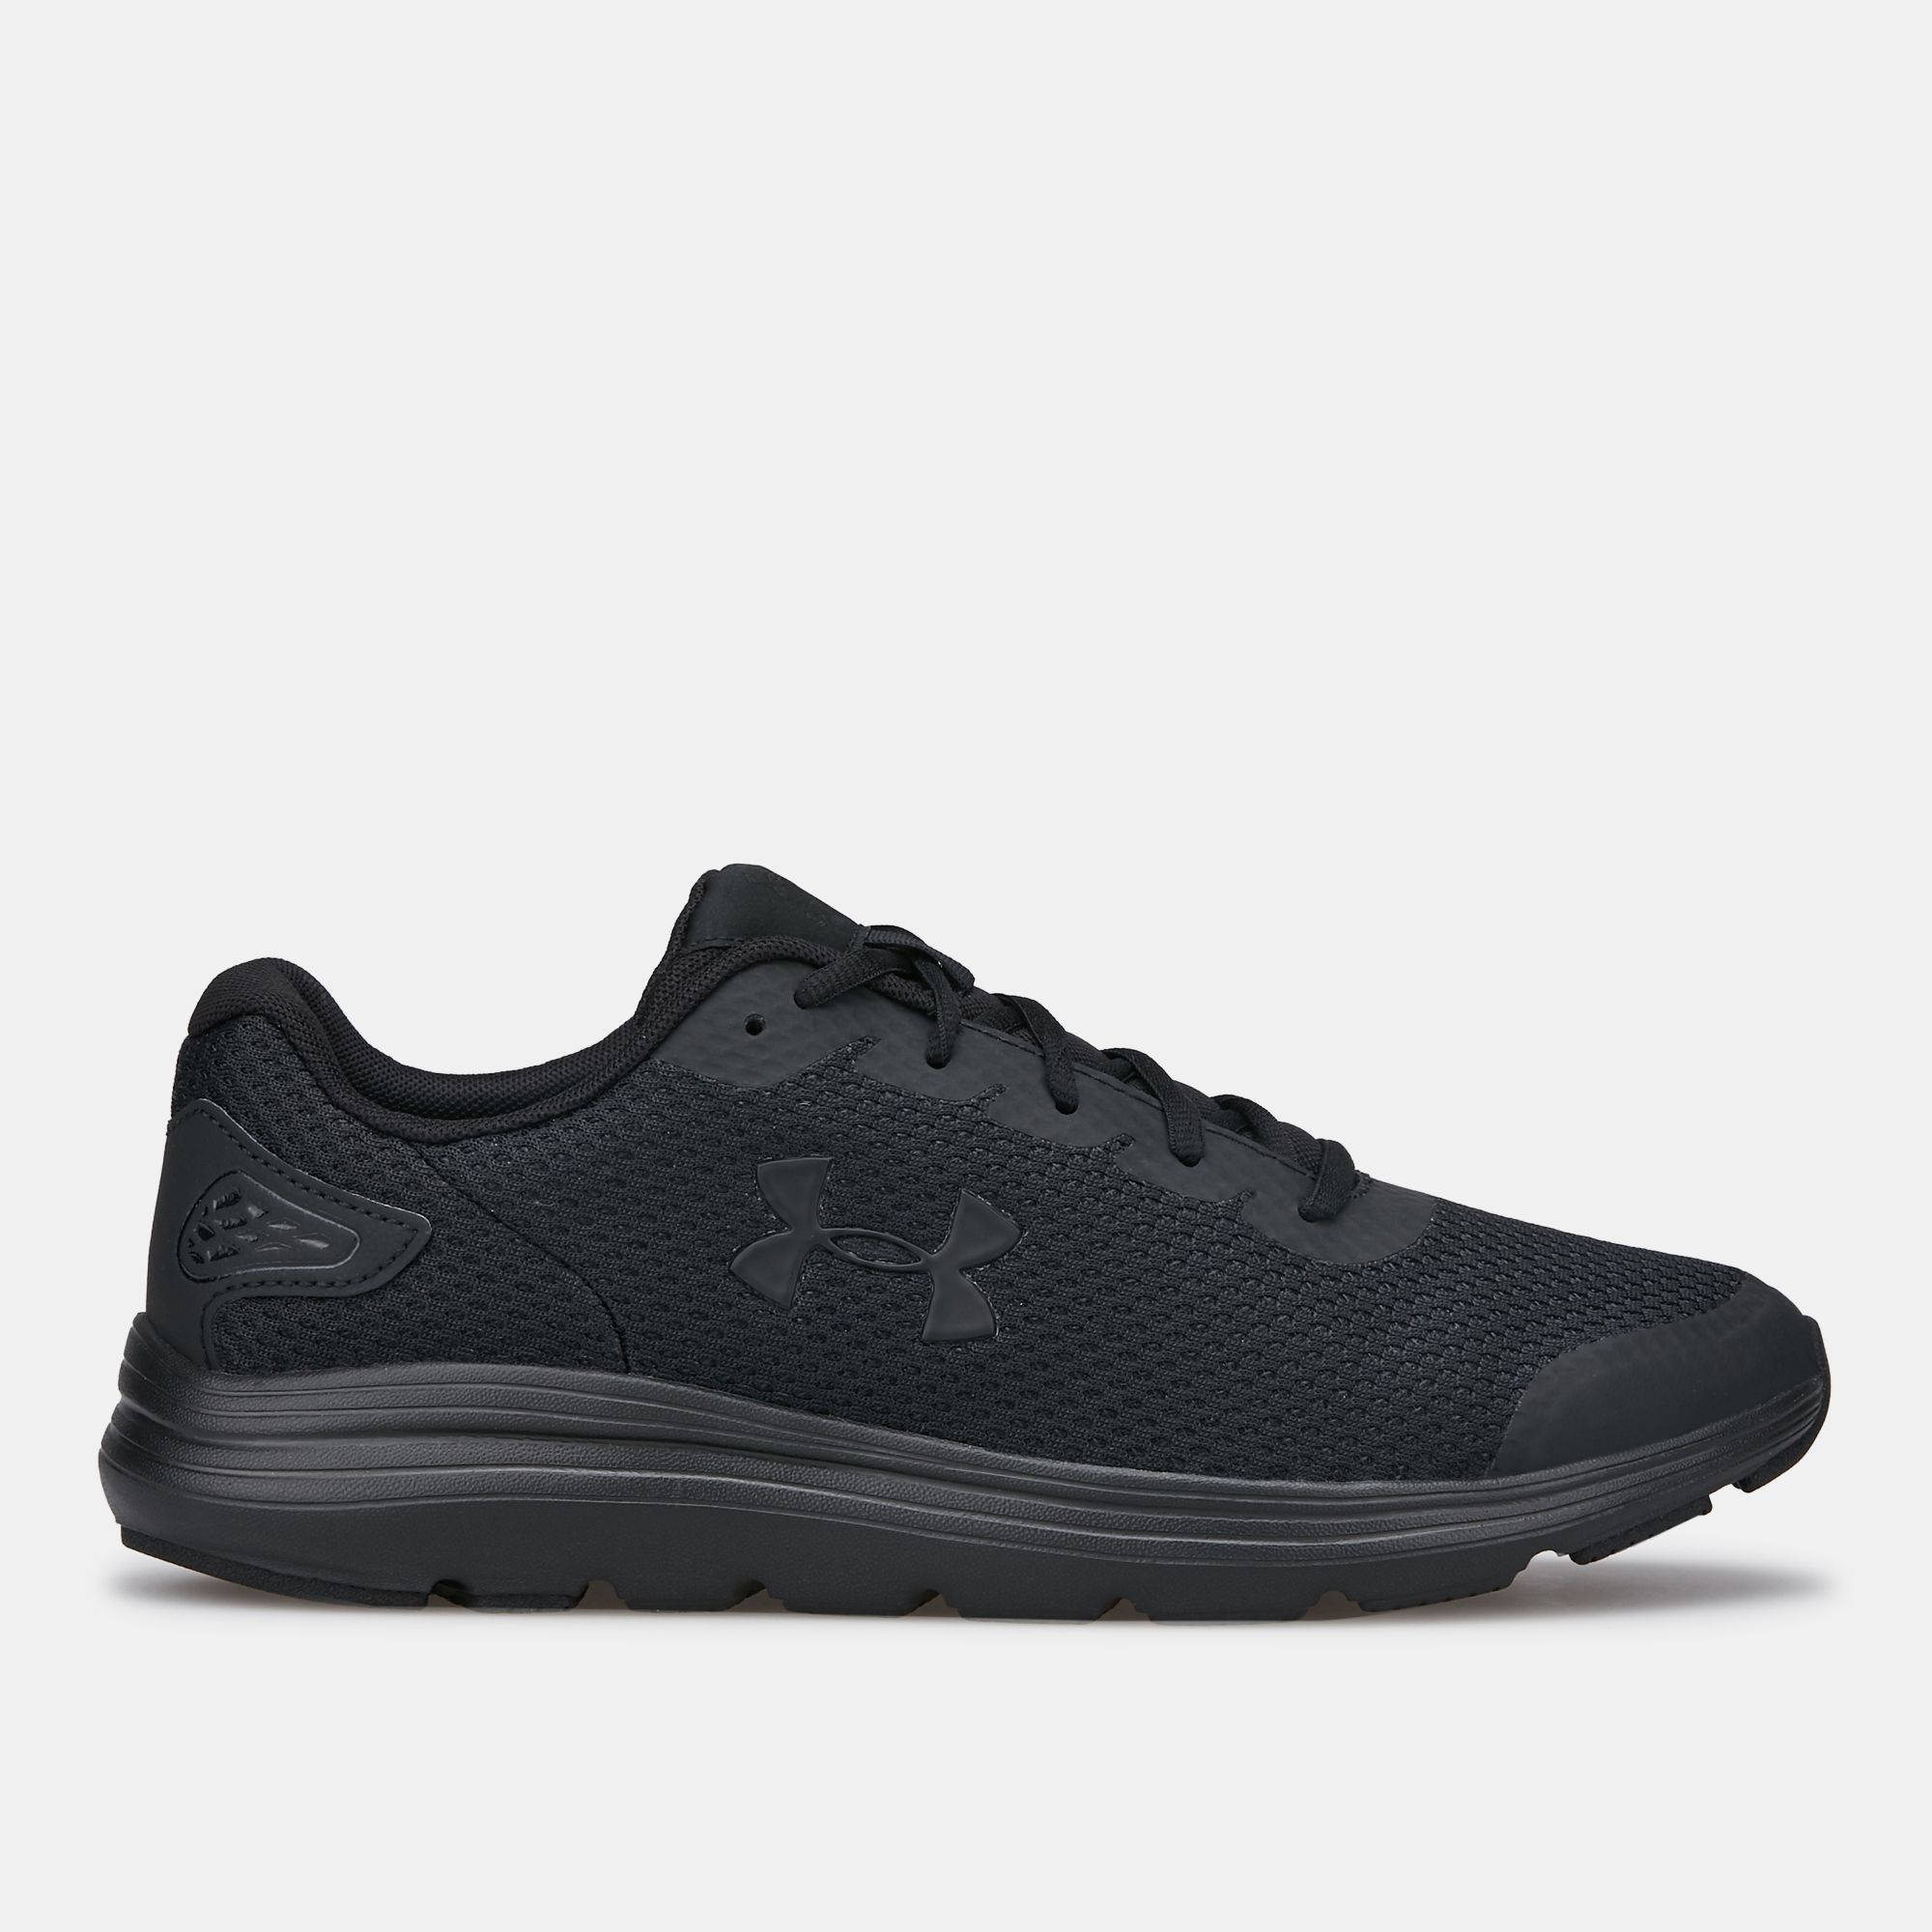 under armour surge men's running shoes